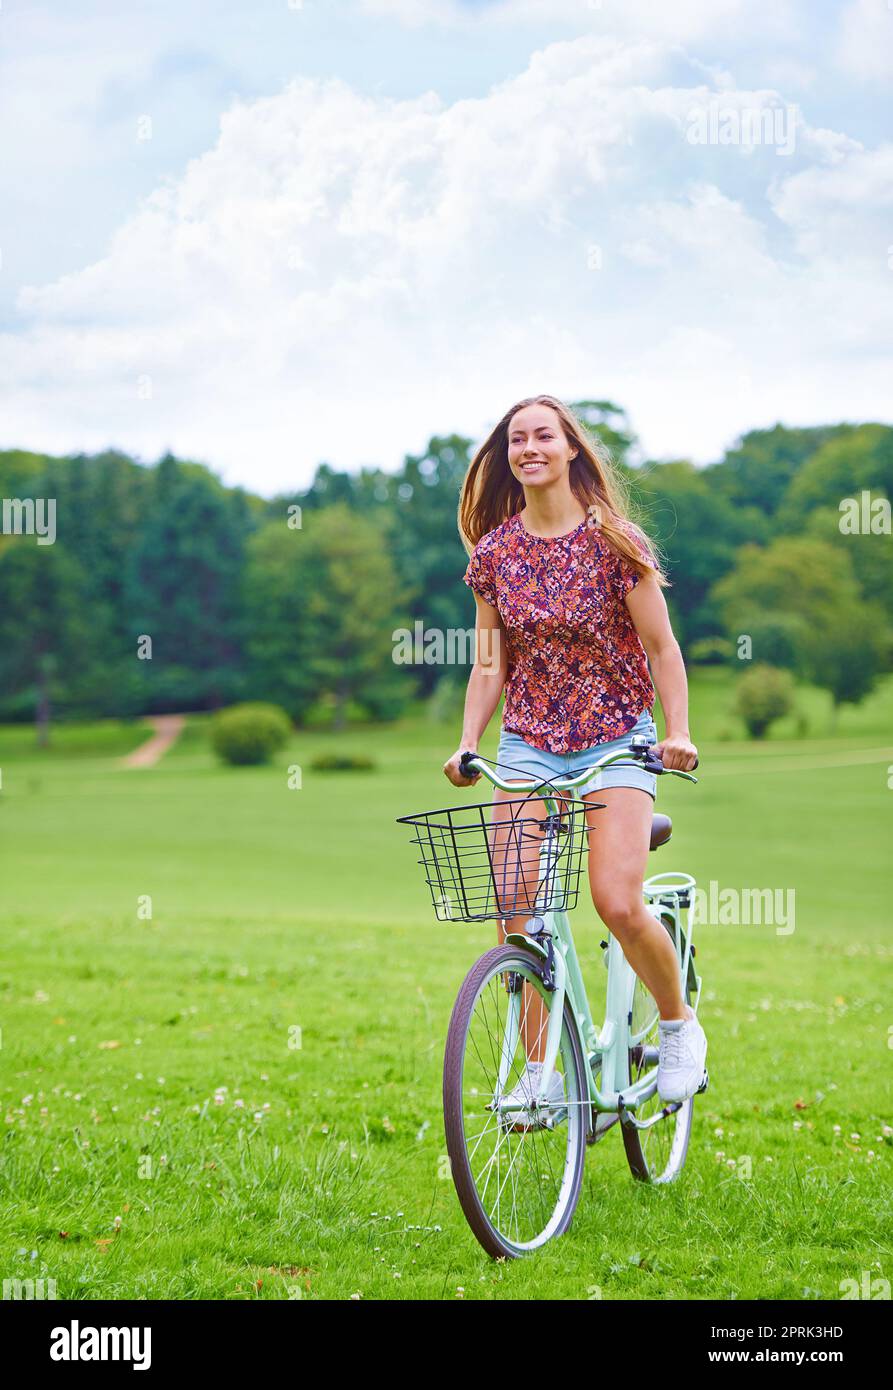 Sight seeing in nature. a young woman cycling in the countryside. Stock Photo